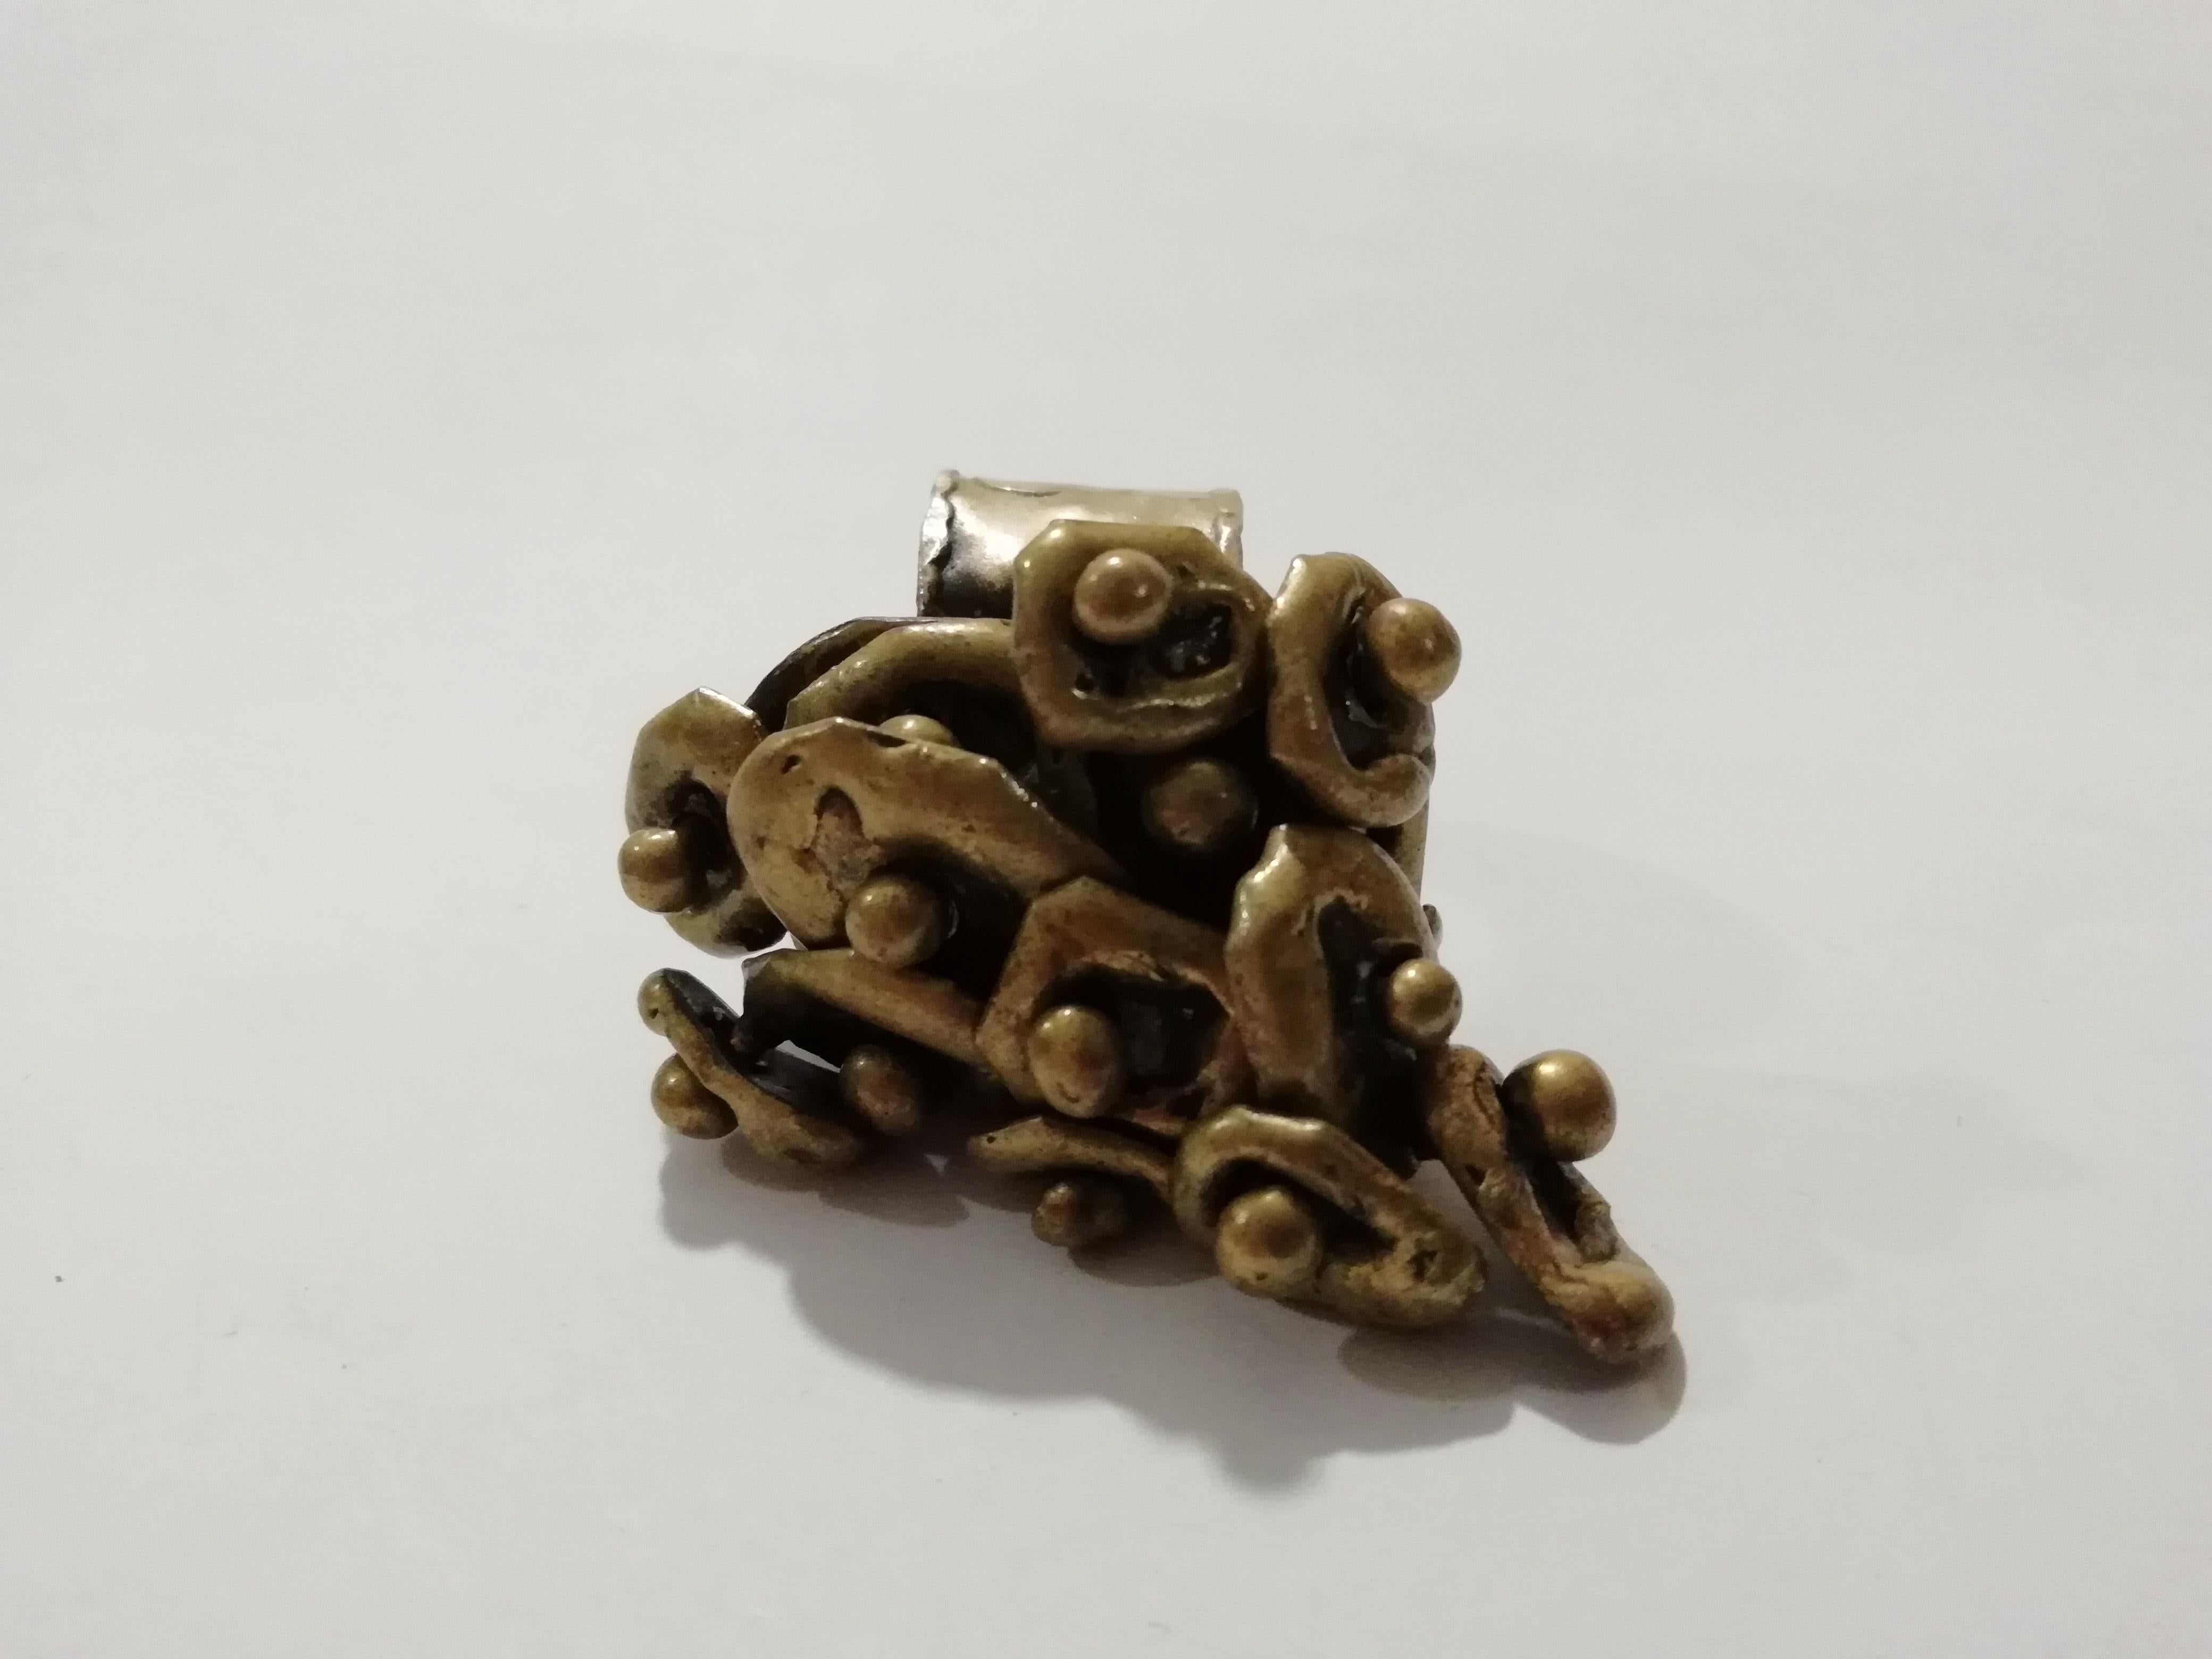 A gorgeous Brutalist bronze Kinetic ring by Pal Kepenyes. The ring shows rotating organic motifs. Signed.

A sculptor from Hungary who was nationalized Mexican, Pal Kepenyes resides in Acapulco where he has a studio. In his sculptures we can